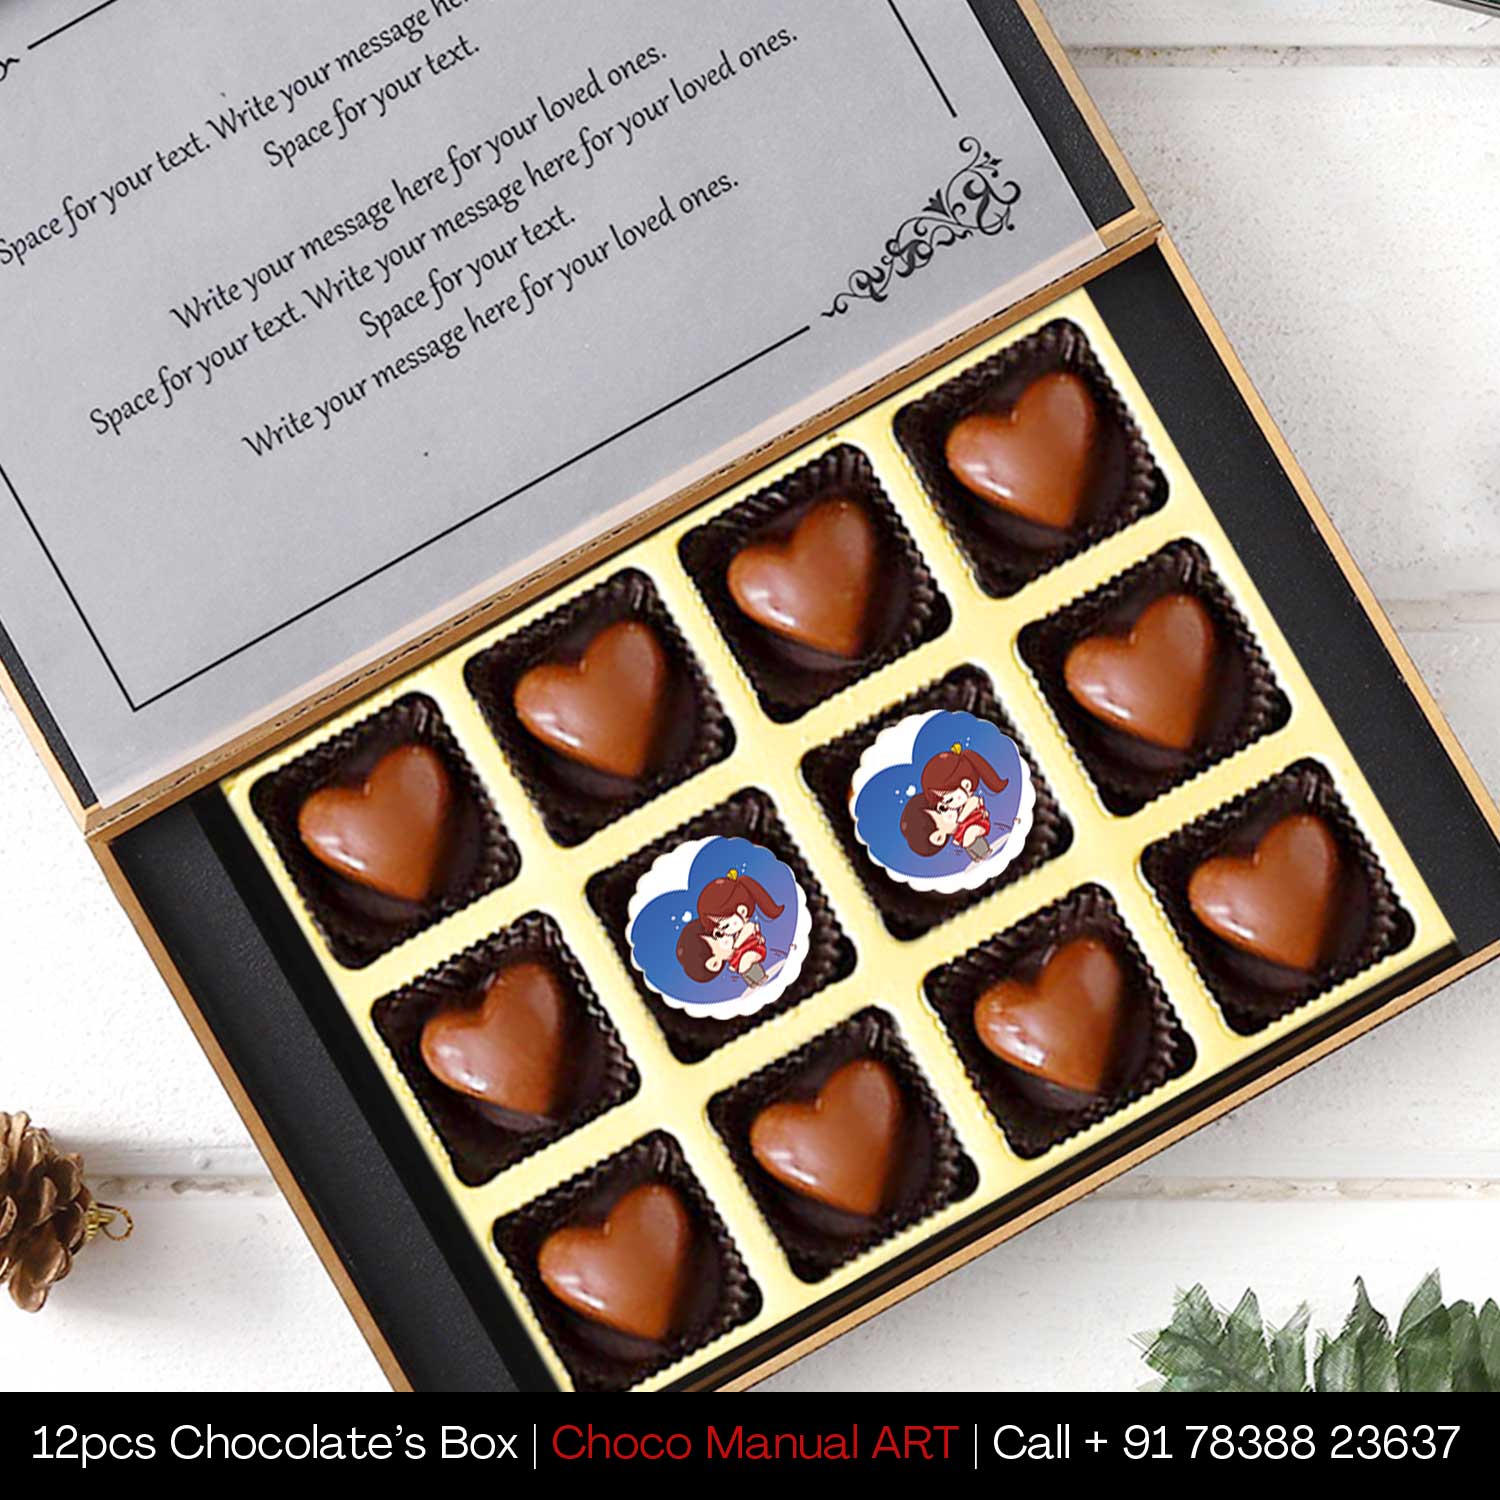 Personalized Kiss Day chocolate gift with photo/name printed